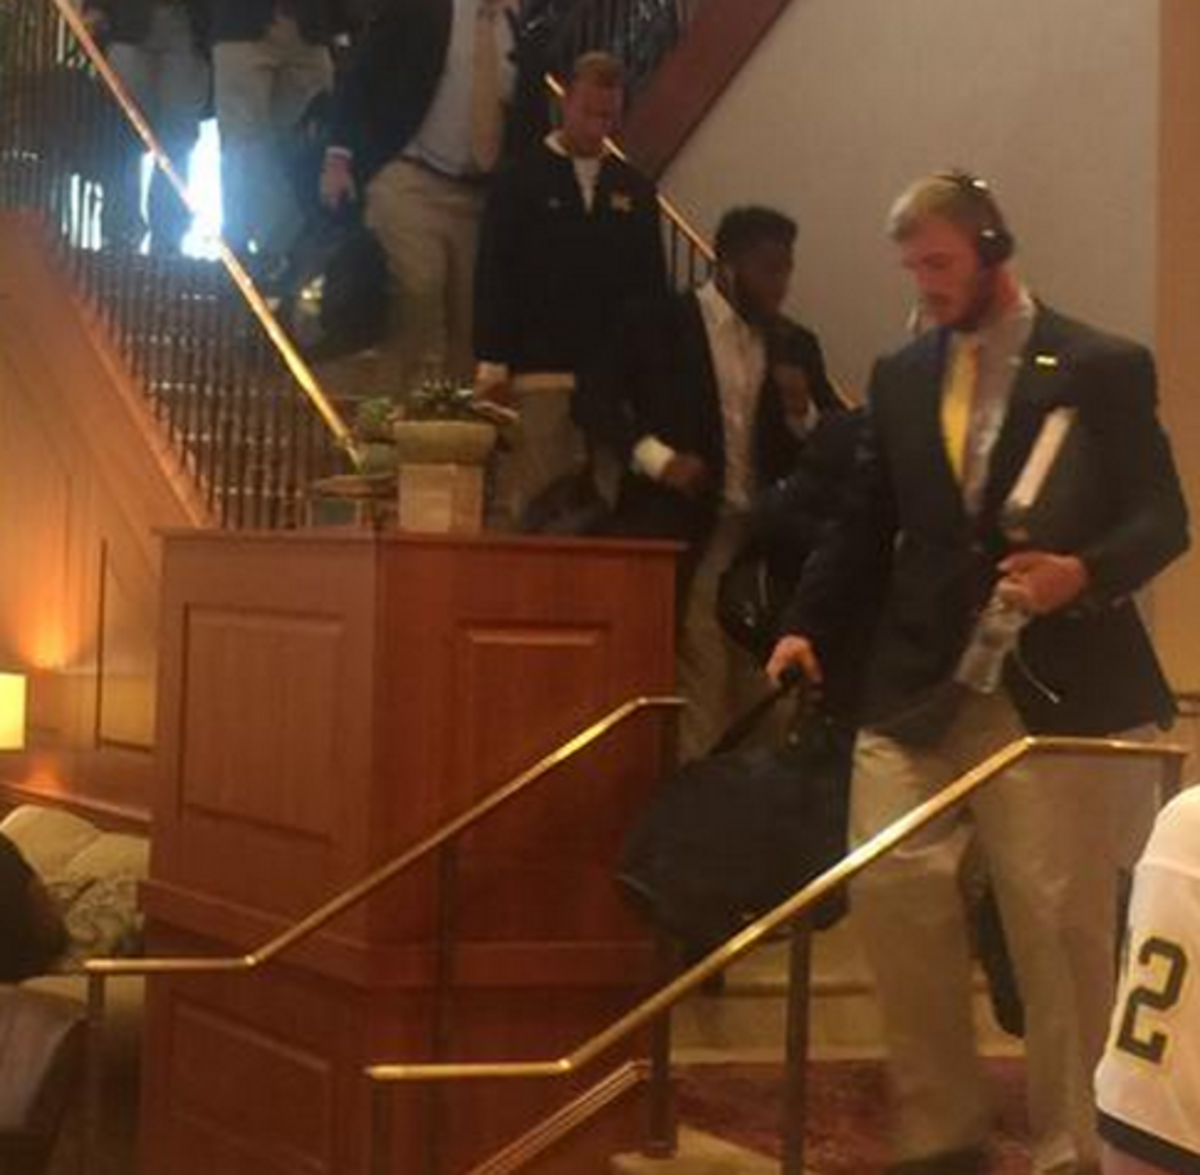 Michigan football players making their way down the stairs.